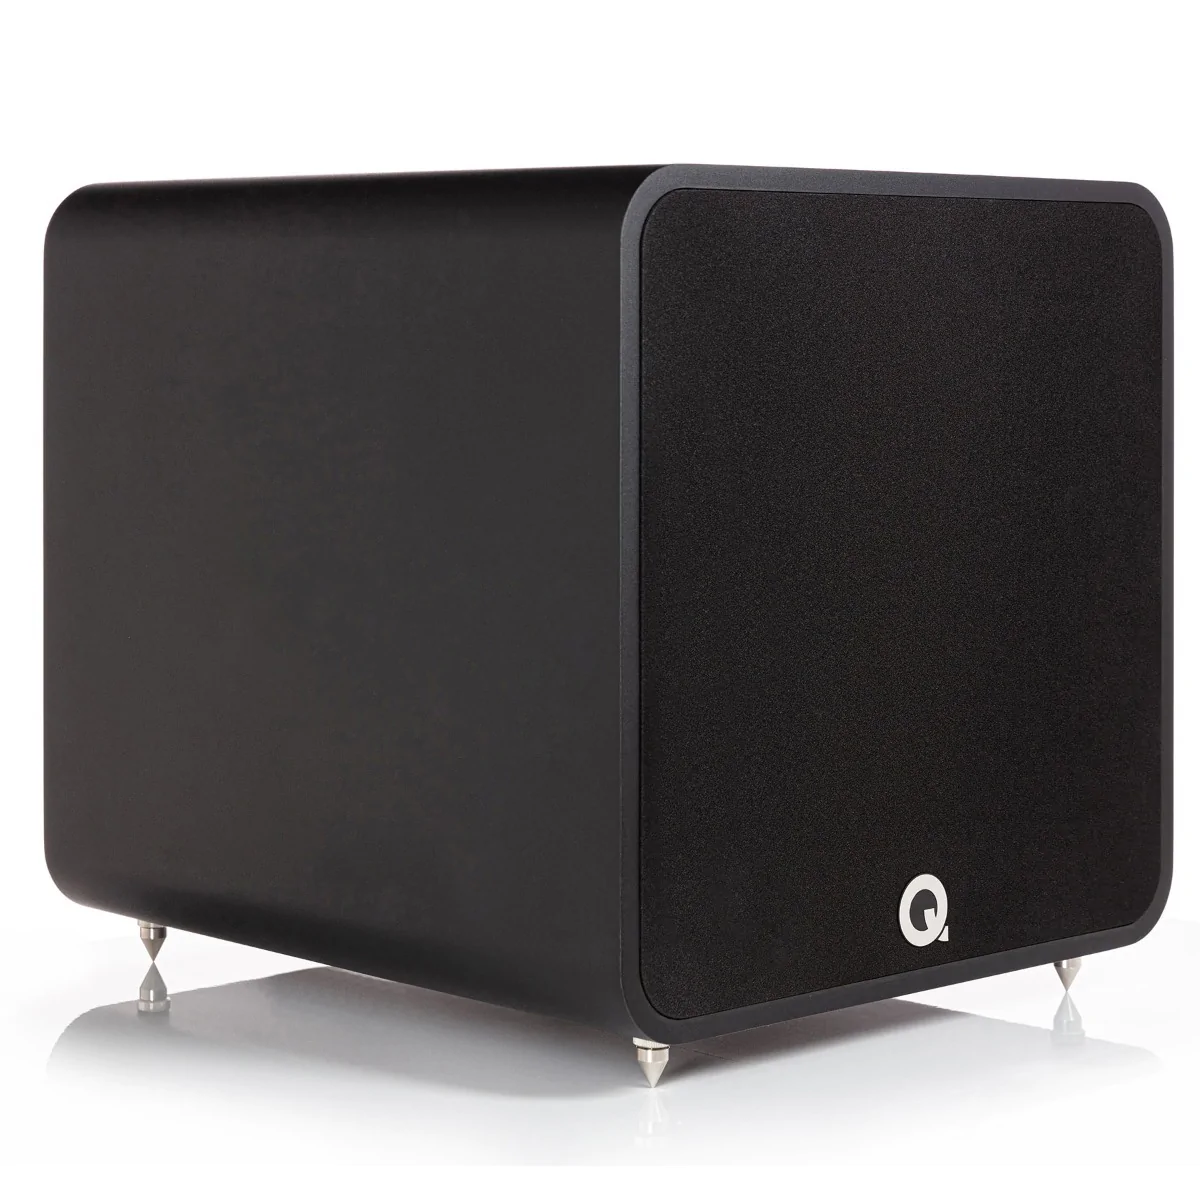 bass frequencies are substantially omni-directional Q Acoustics QB12